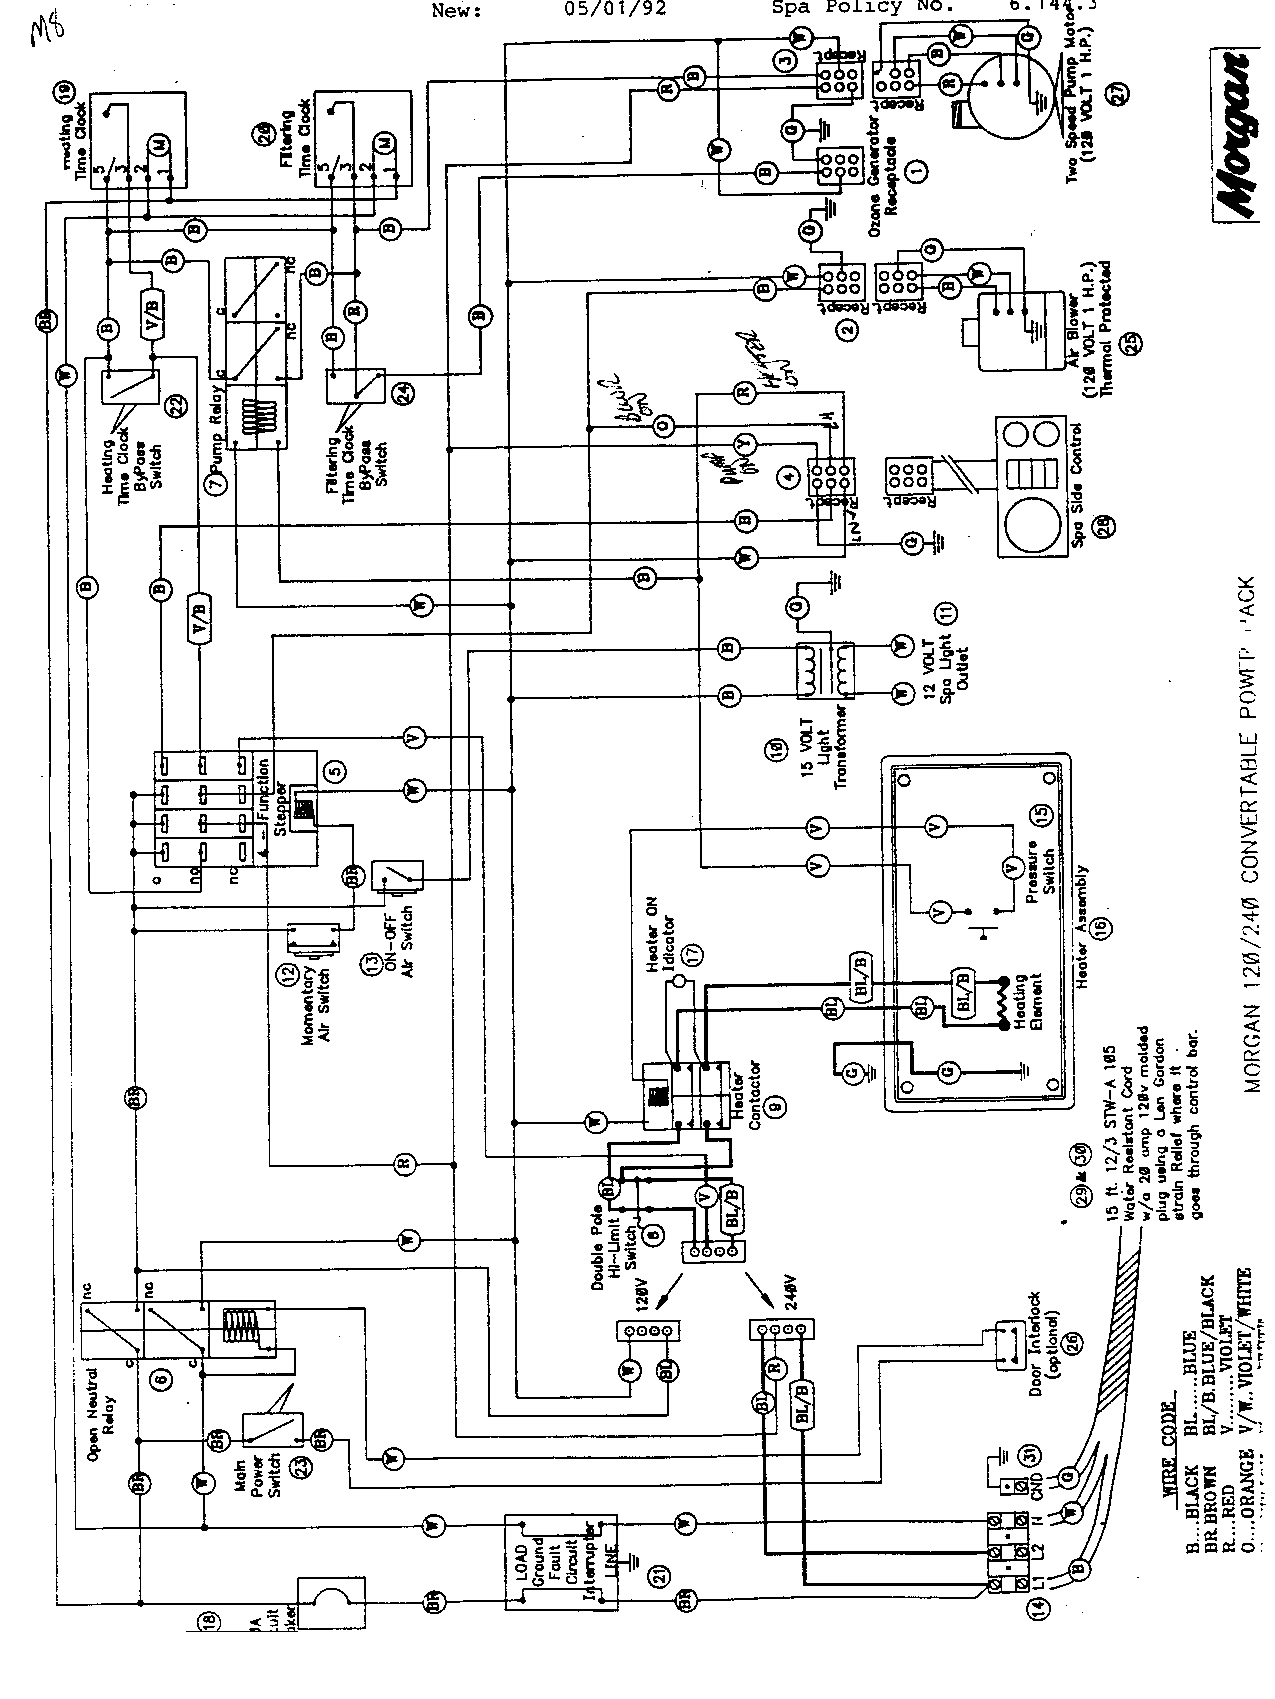 Hot Spring Spa Wiring Diagram from sparesources.com